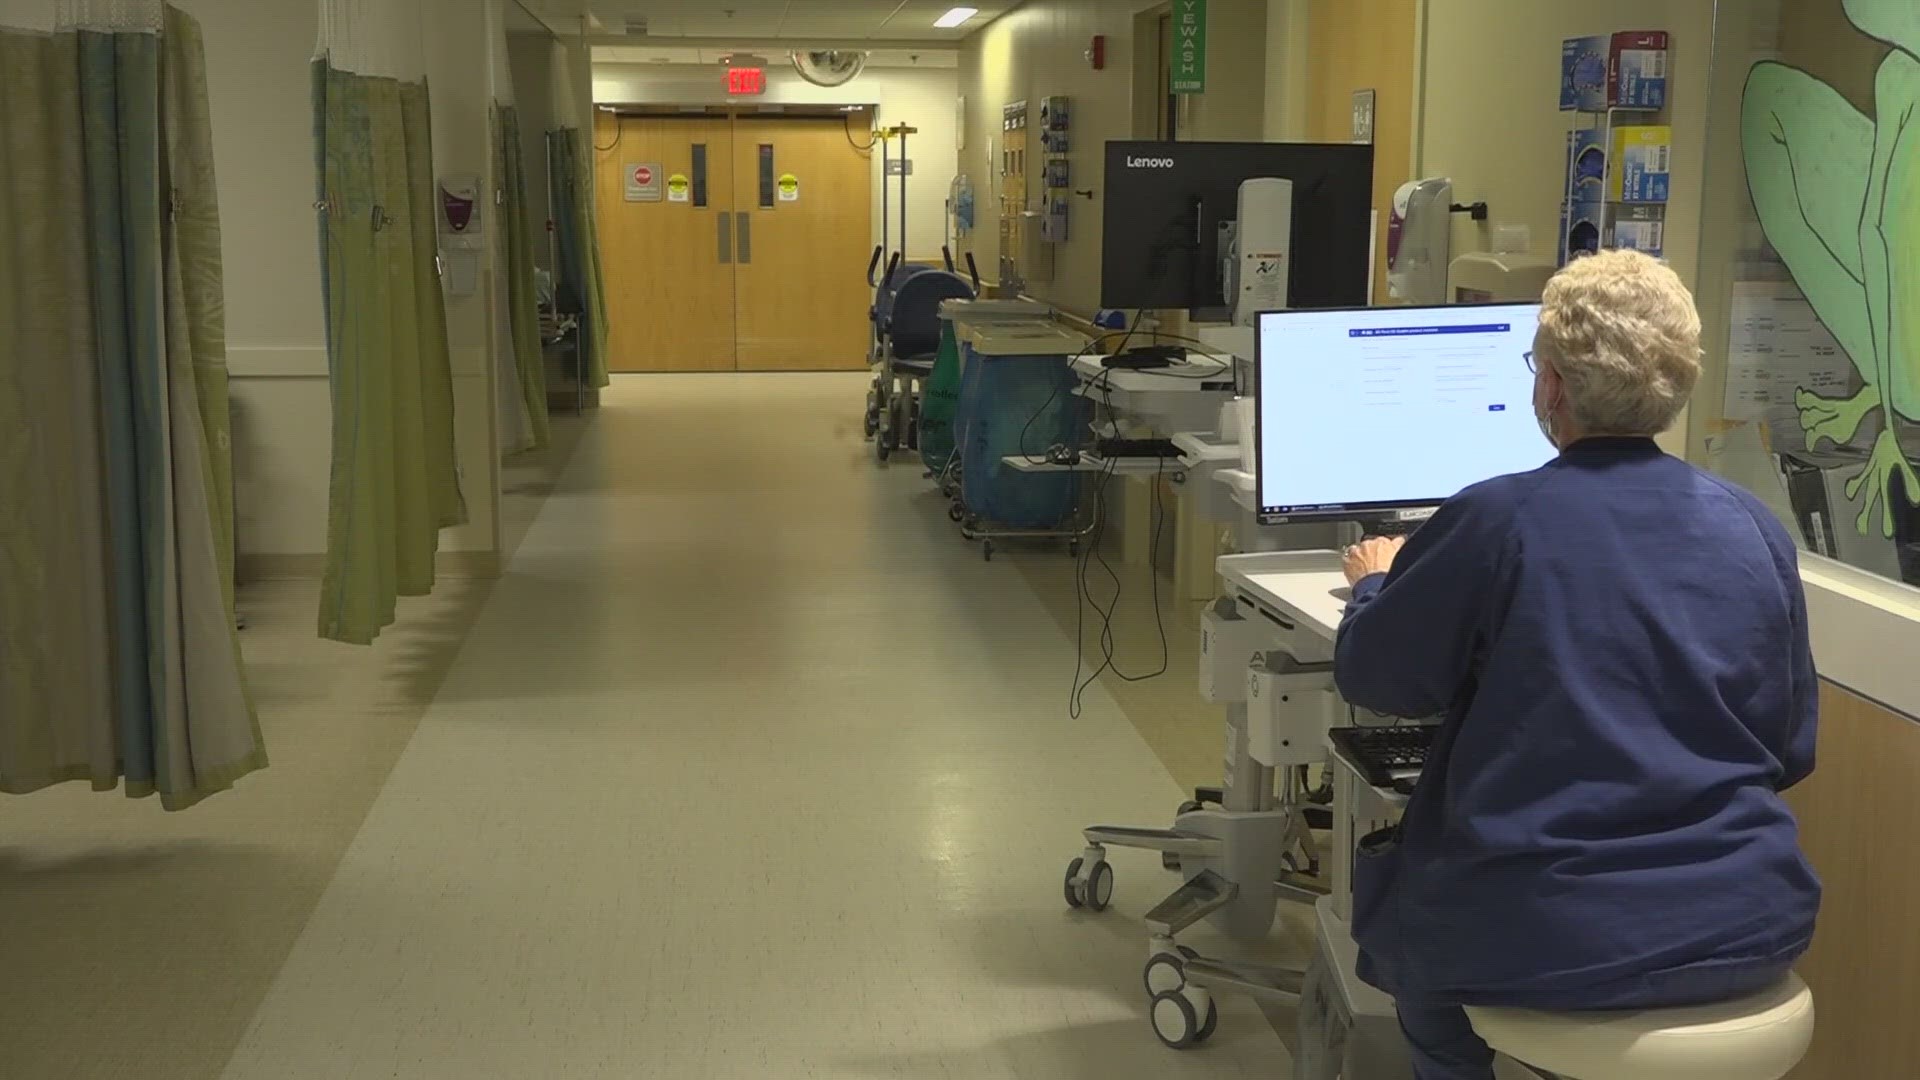 A spokesperson for the hospital said a hardware failure caused an outage with the patient information system.